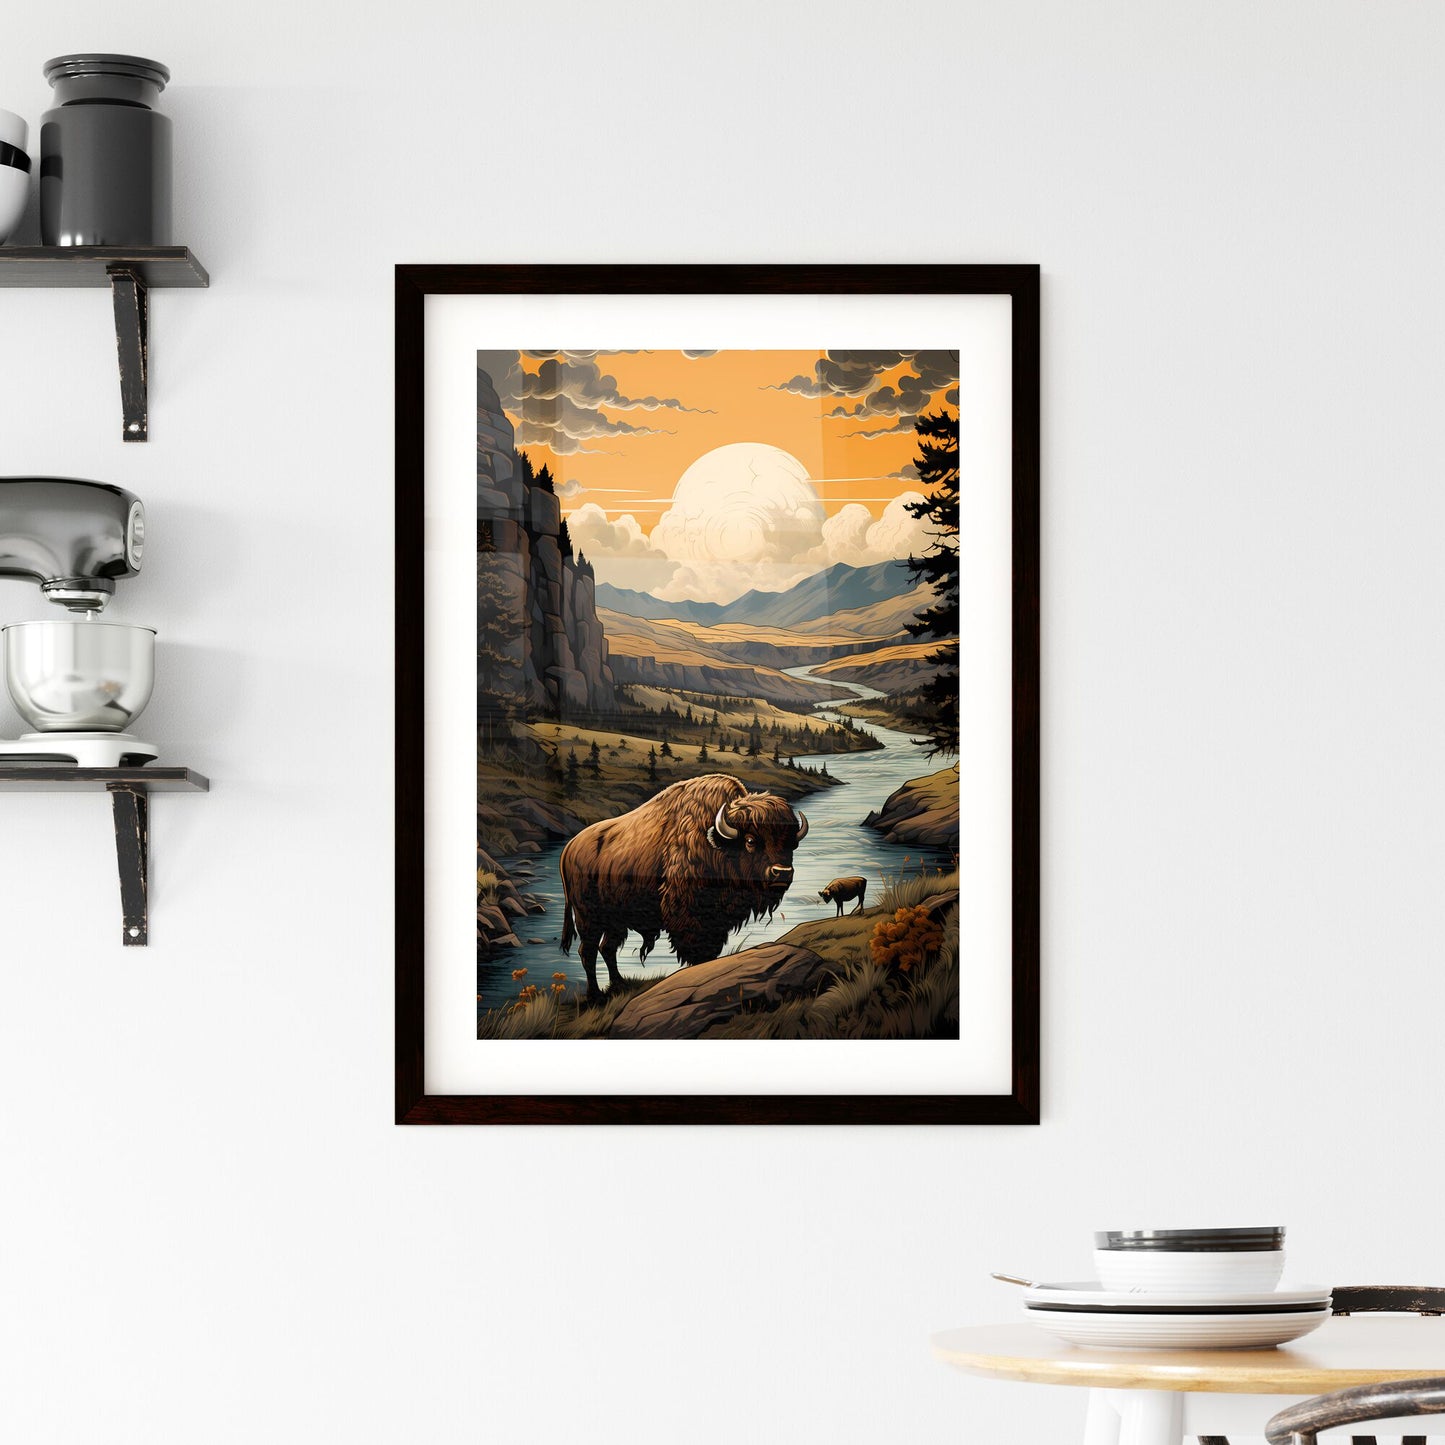 A Poster of Yellowstone National Park - A Buffalo Standing In A River Default Title